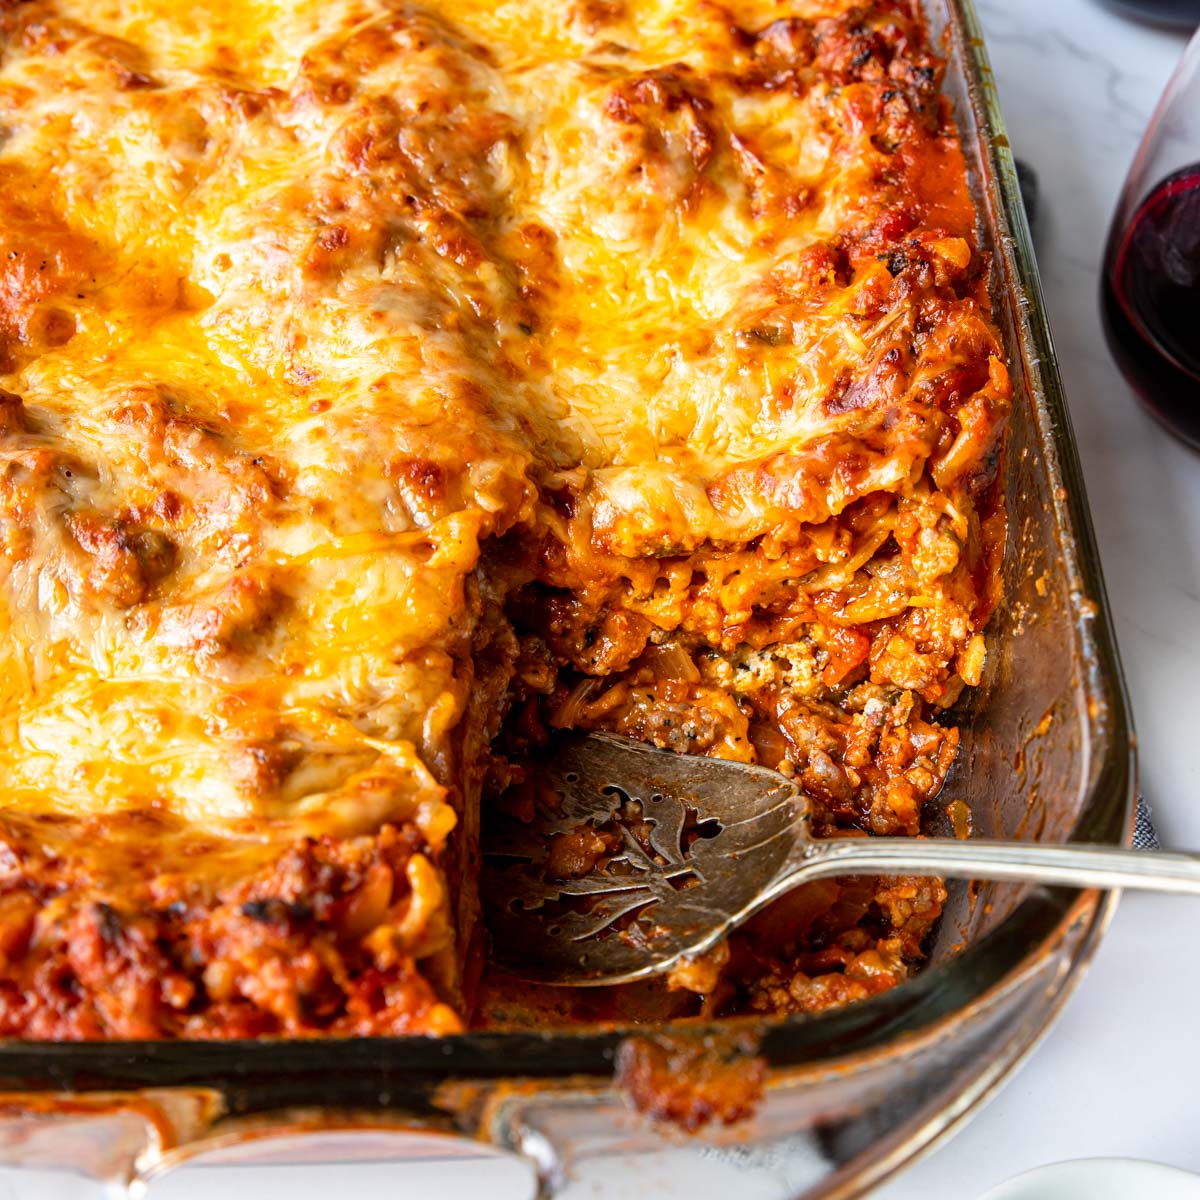 Homemade Meat Lasagna from Scratch